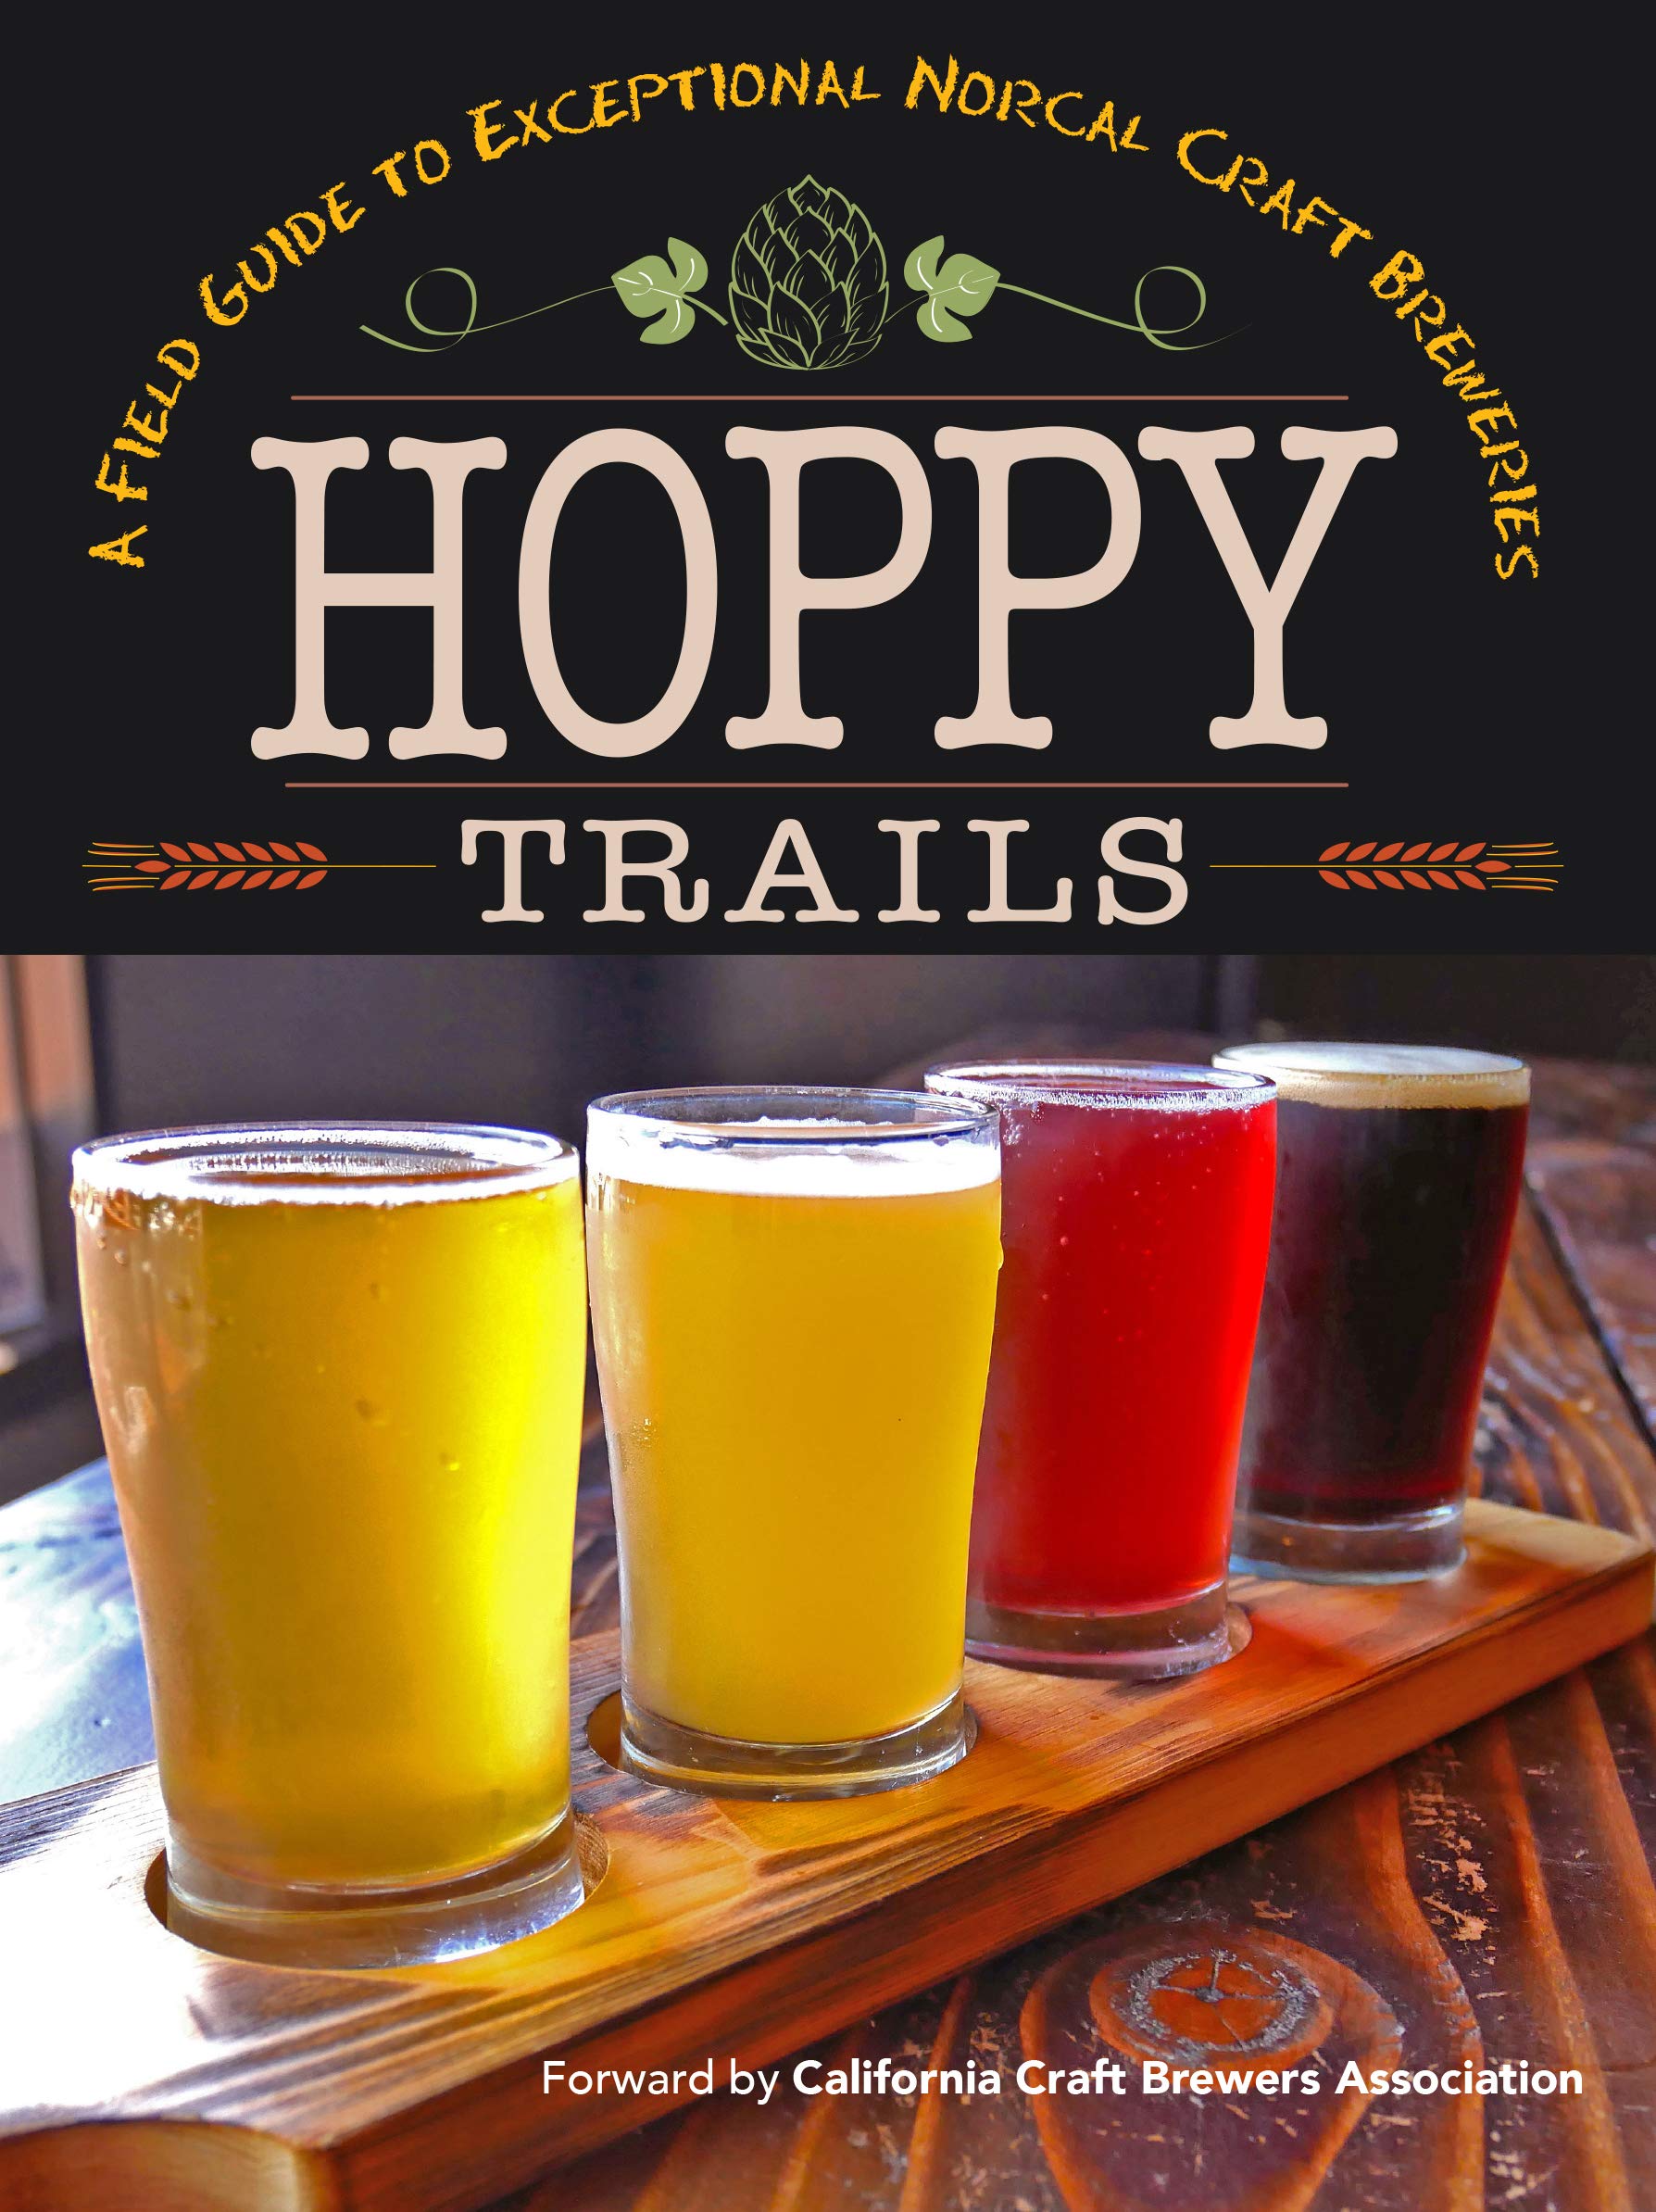 Hoppy Trails: A Field Guide to Exceptional NorCal Craft Breweries